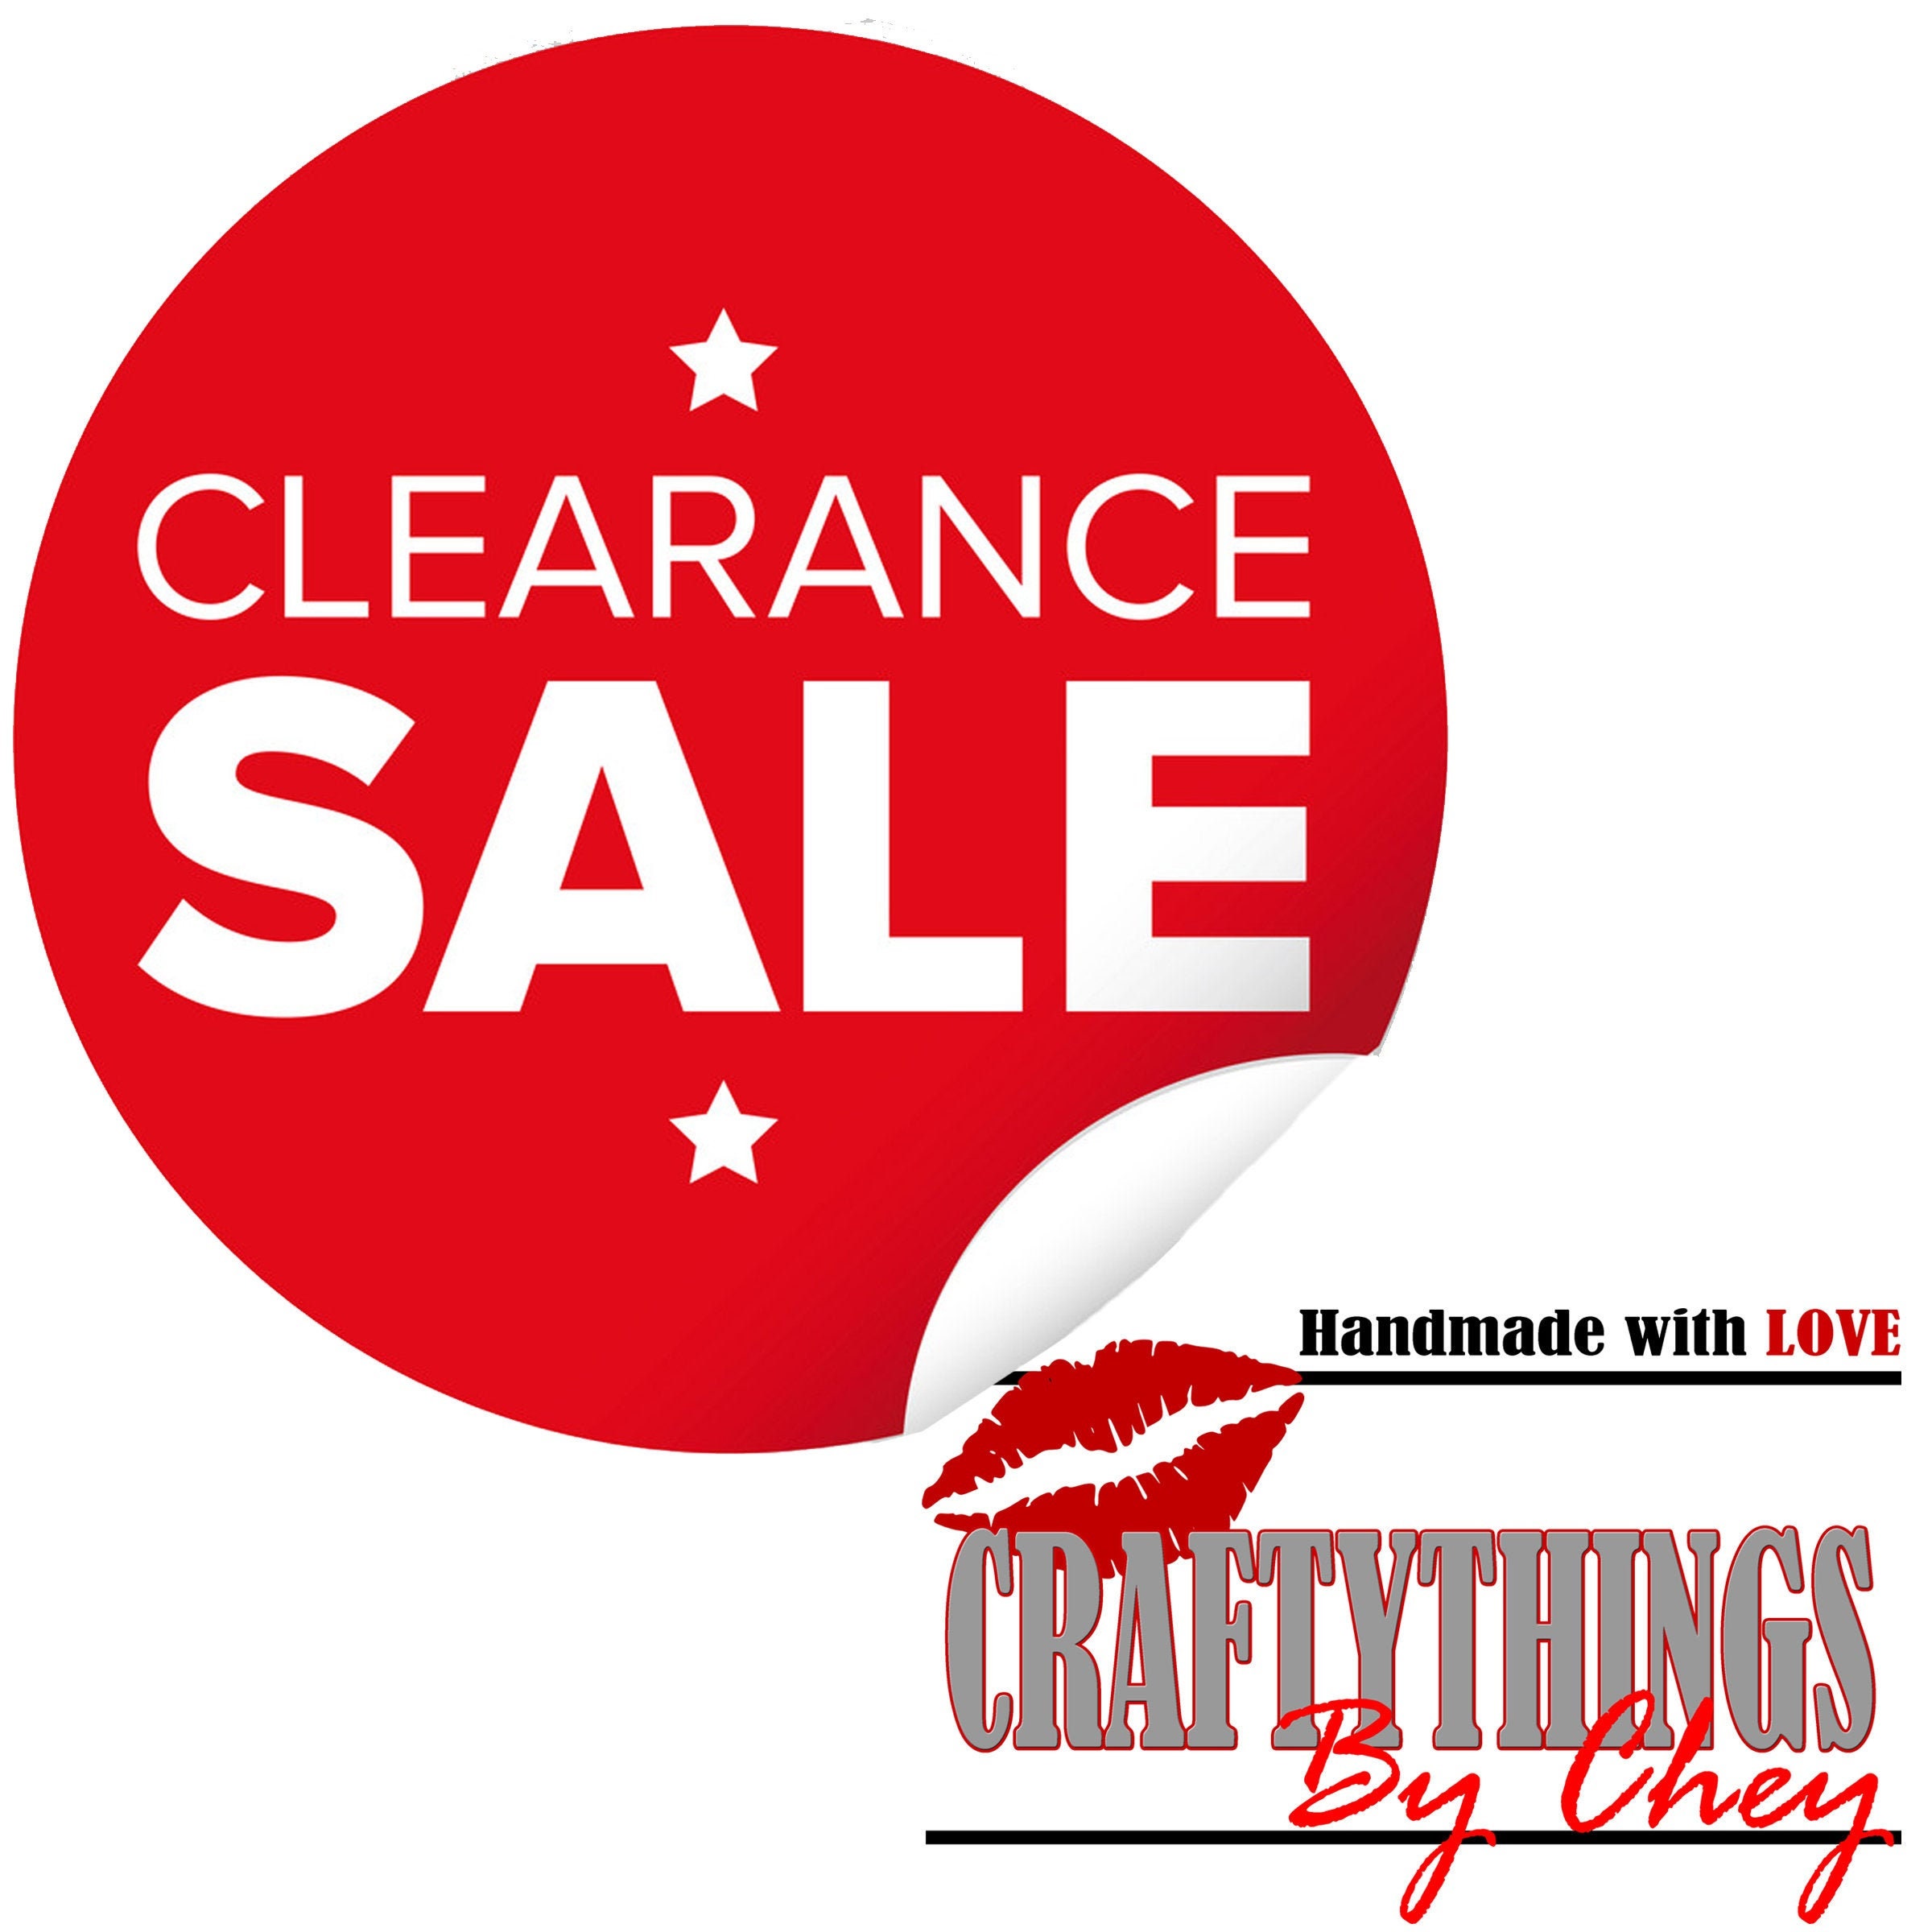 Buy CLEARANCE ITEMS All Things Must Go Discounted Overstock Online